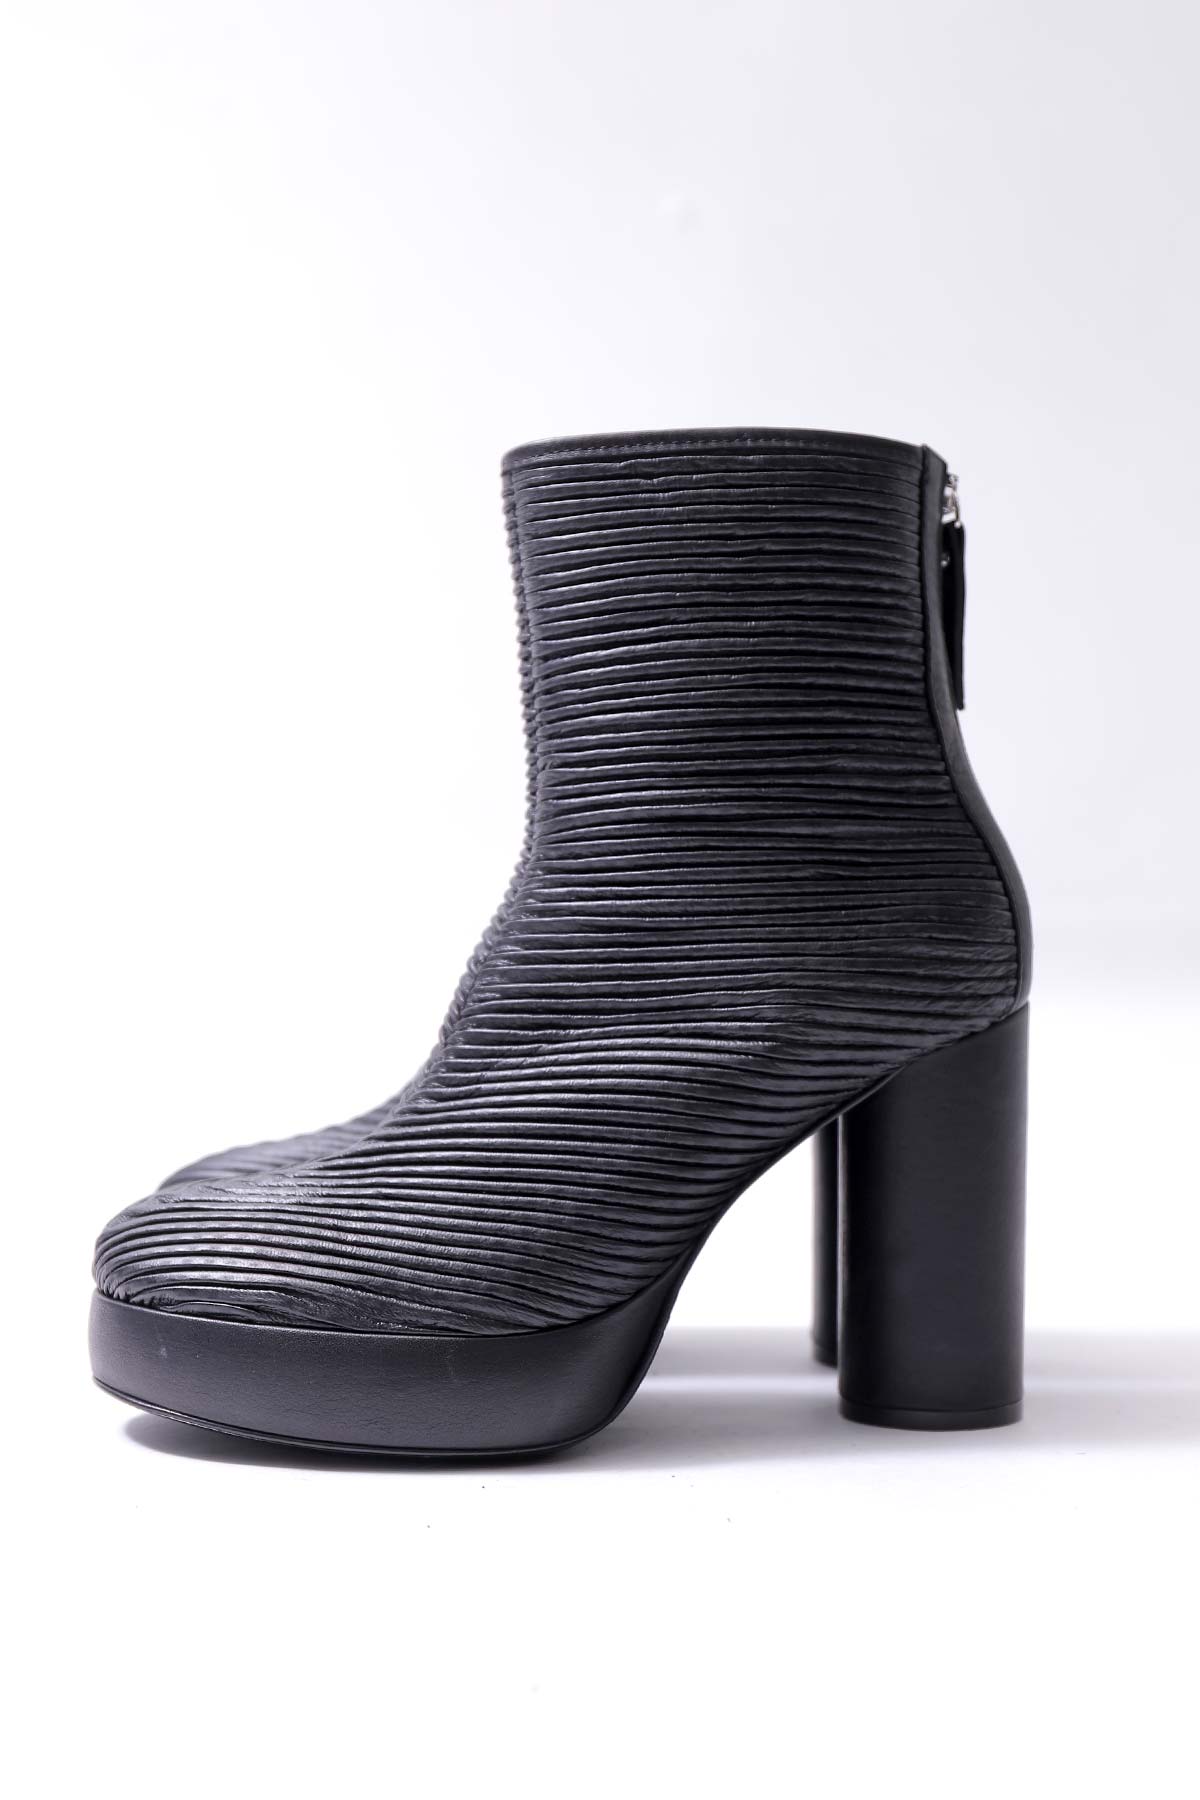 【VIC MATIE】 RIBBED NAPPA LEATHER HEEL BOOTS 5206D